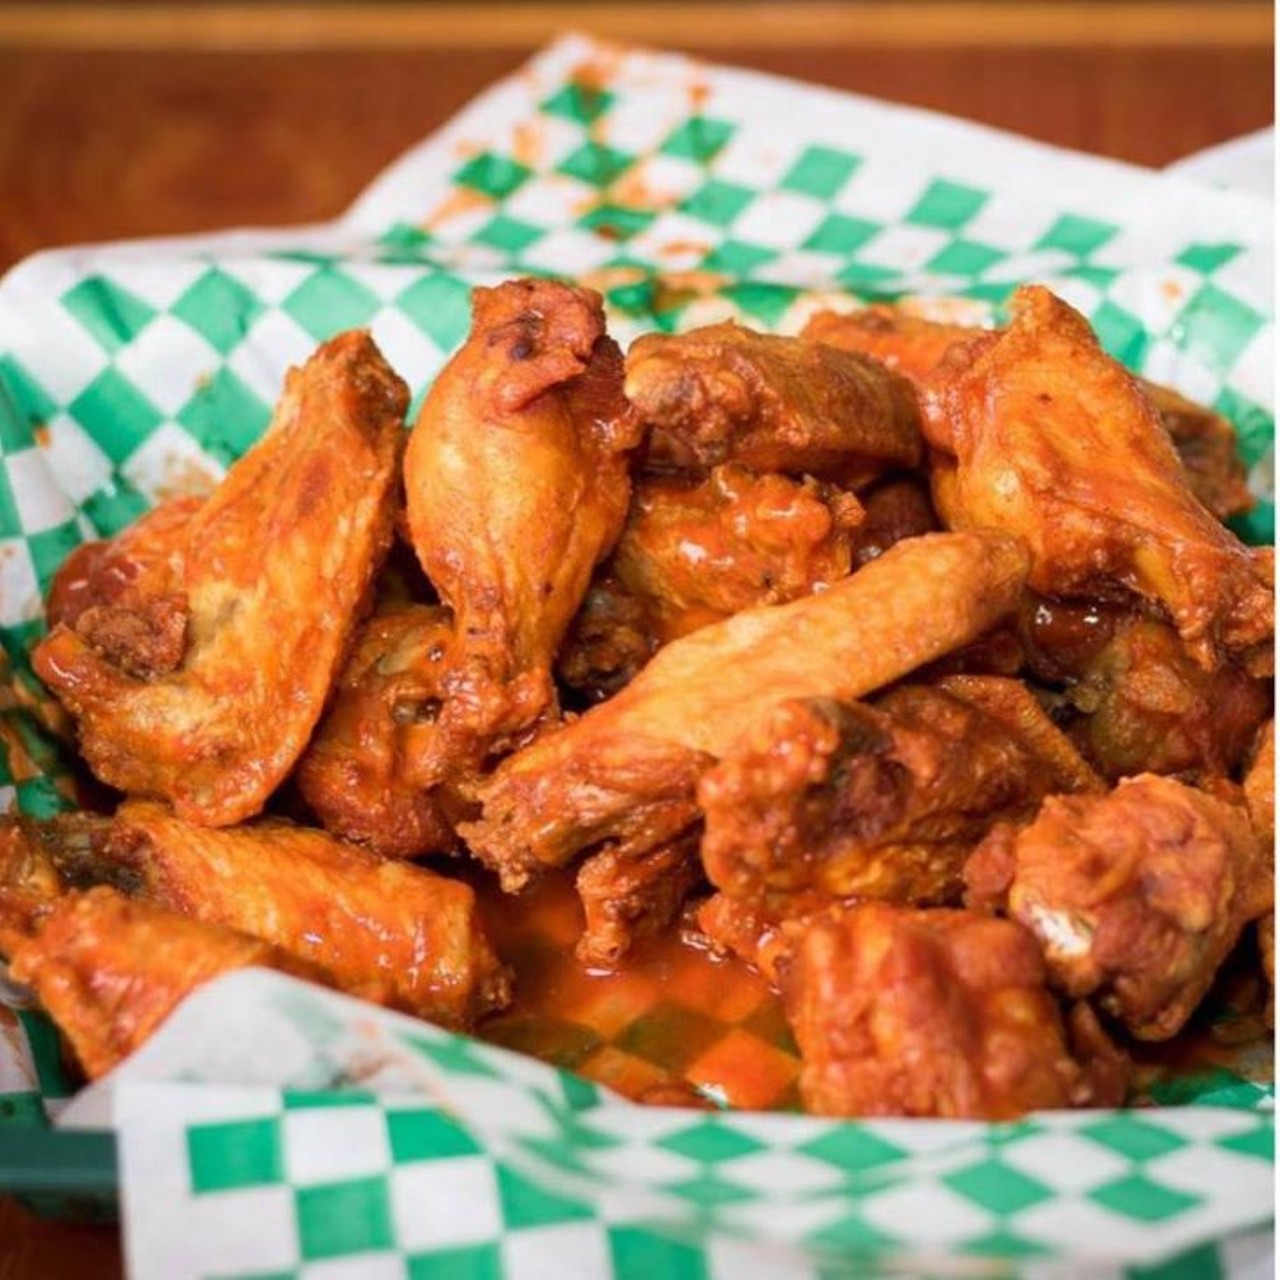 Wing Shack 
4650 E. Michigan St., 407-381-4798
Located near Conway, Wing Shack has been around for 20 years, and offers plenty of music and entertainment to go with their &#147;award-winning&#148; wings.
Photo via Wing Shack on Wing Shack&#146;s